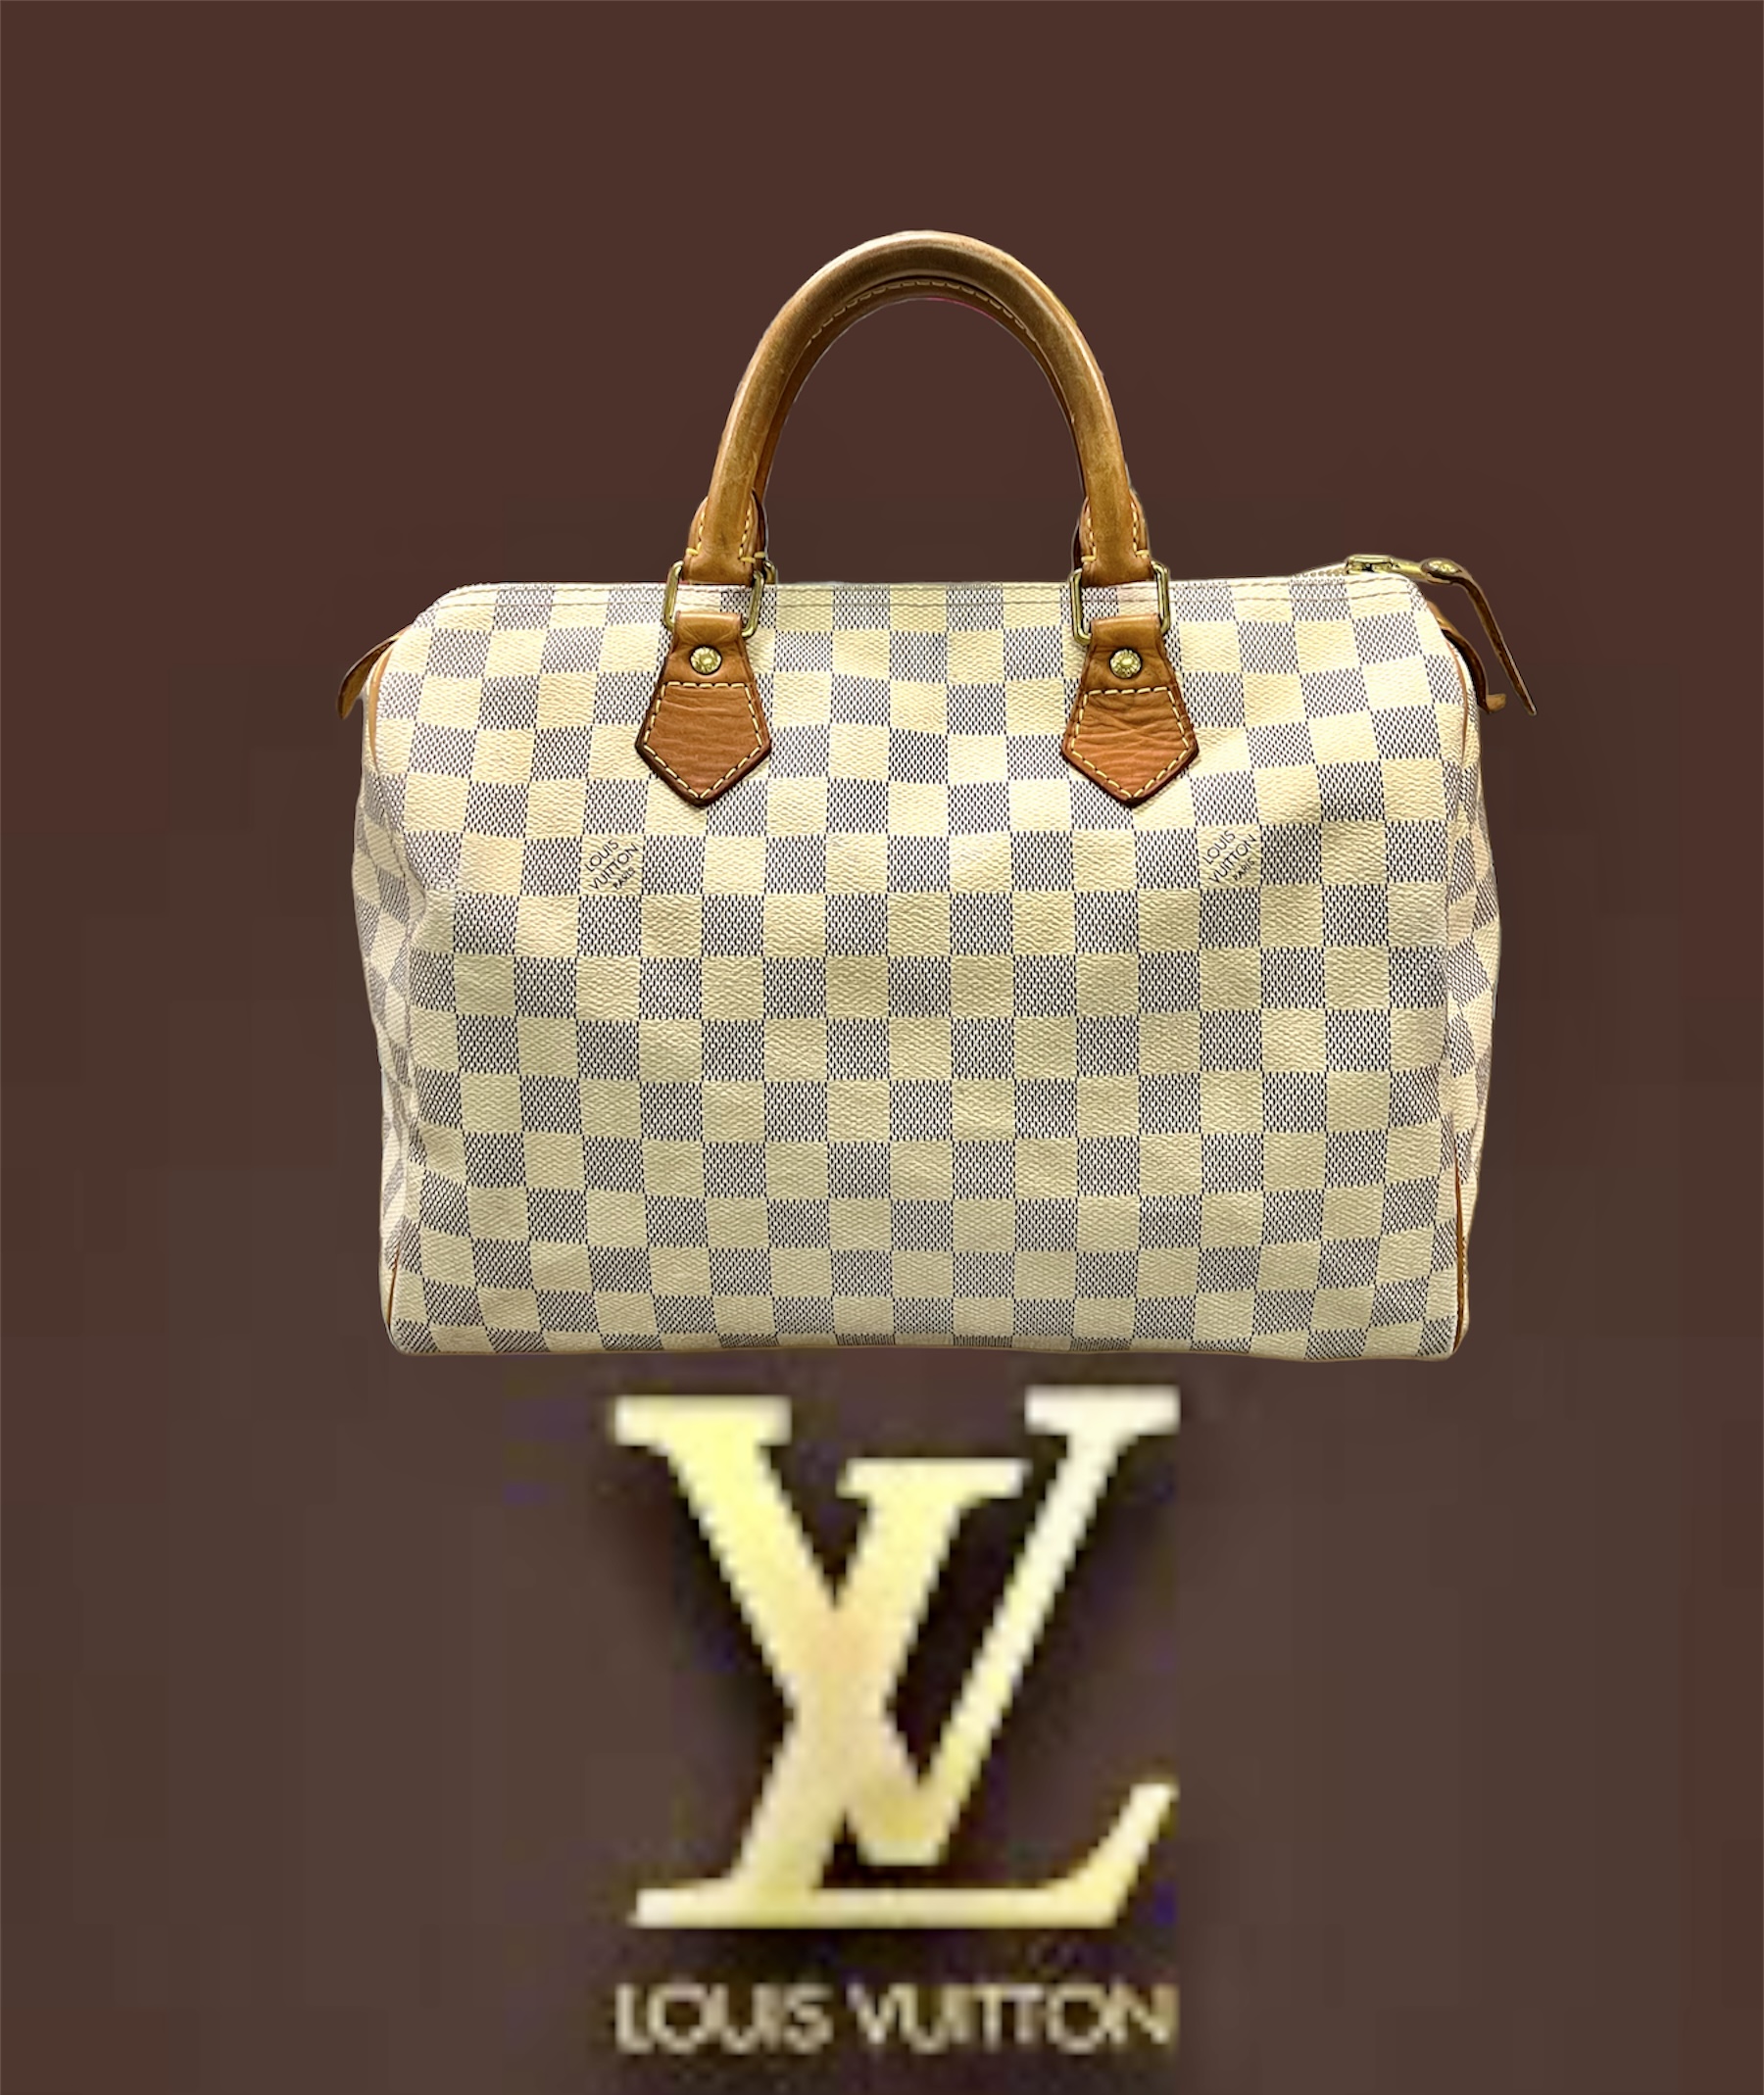 Louis Vuitton
This is an authentic LOUIS VUITTON Damier Azur Speedy 30. This is a stylish, iconic tote, crafted of Louis Vuitton Damier coated canvas in blue and white. The handbag features natural vachetta cowhide leather trim and rolled top handles with brass handle rings. The brass top zipper opens to an interior of beige fabric with a hanging patch pocket.

Base length: 12 in
Height: 8.5 in
Width: 7 in
Drop: 3.5 in
COMES with CERTIFICATE of AUTHENTICITY
This Speedy is pre-loved and does show signs of wear.